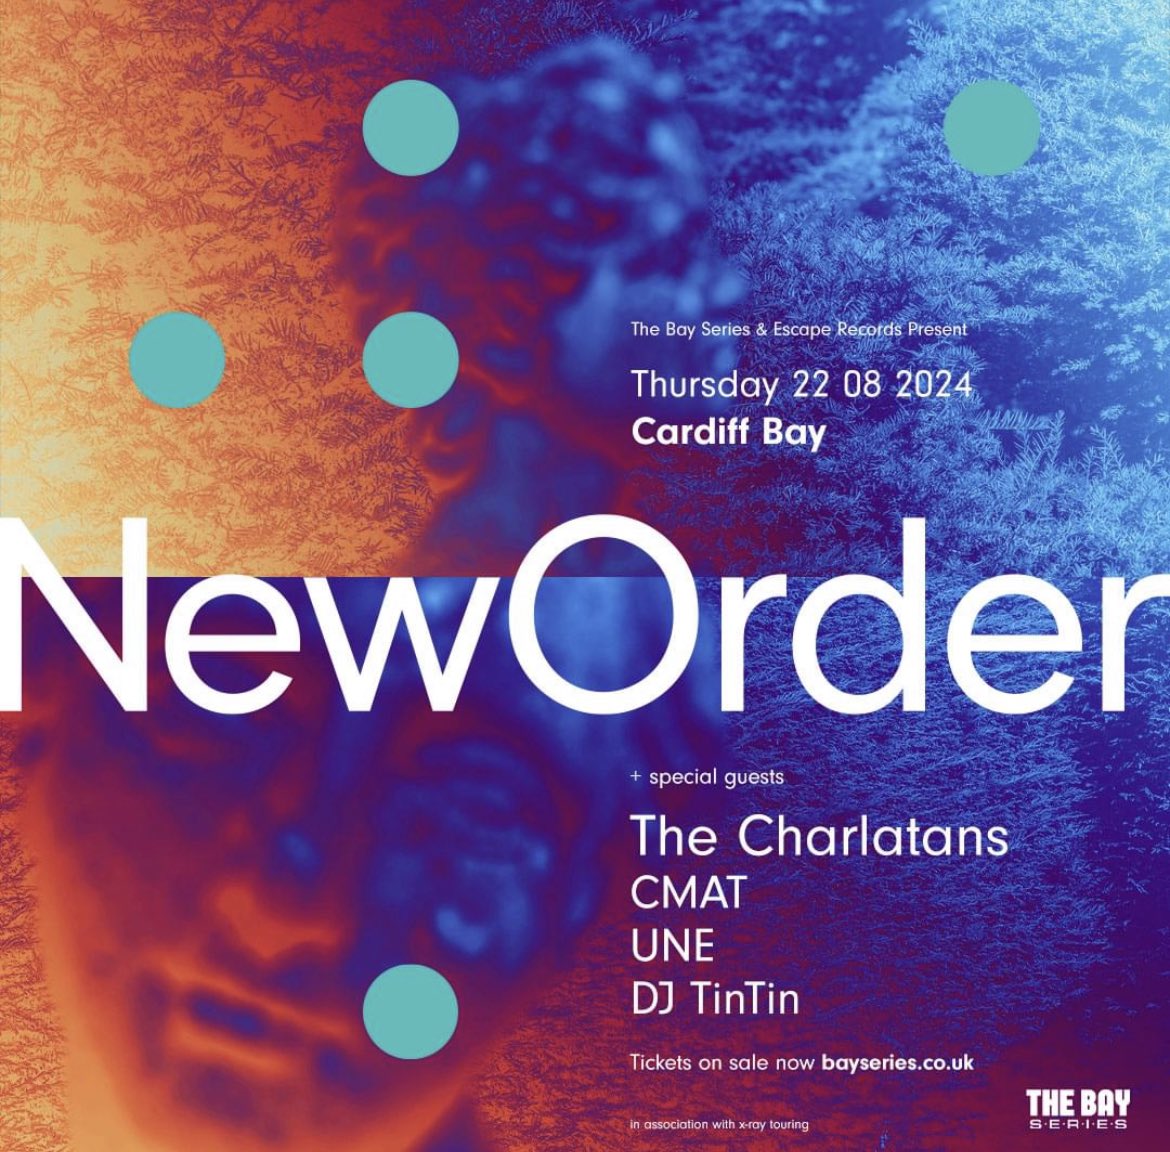 Chuffed to little mintballs to be heading to Cardiff with our top chums @neworder and @thecharlatans It’s a manc love-in on the bay